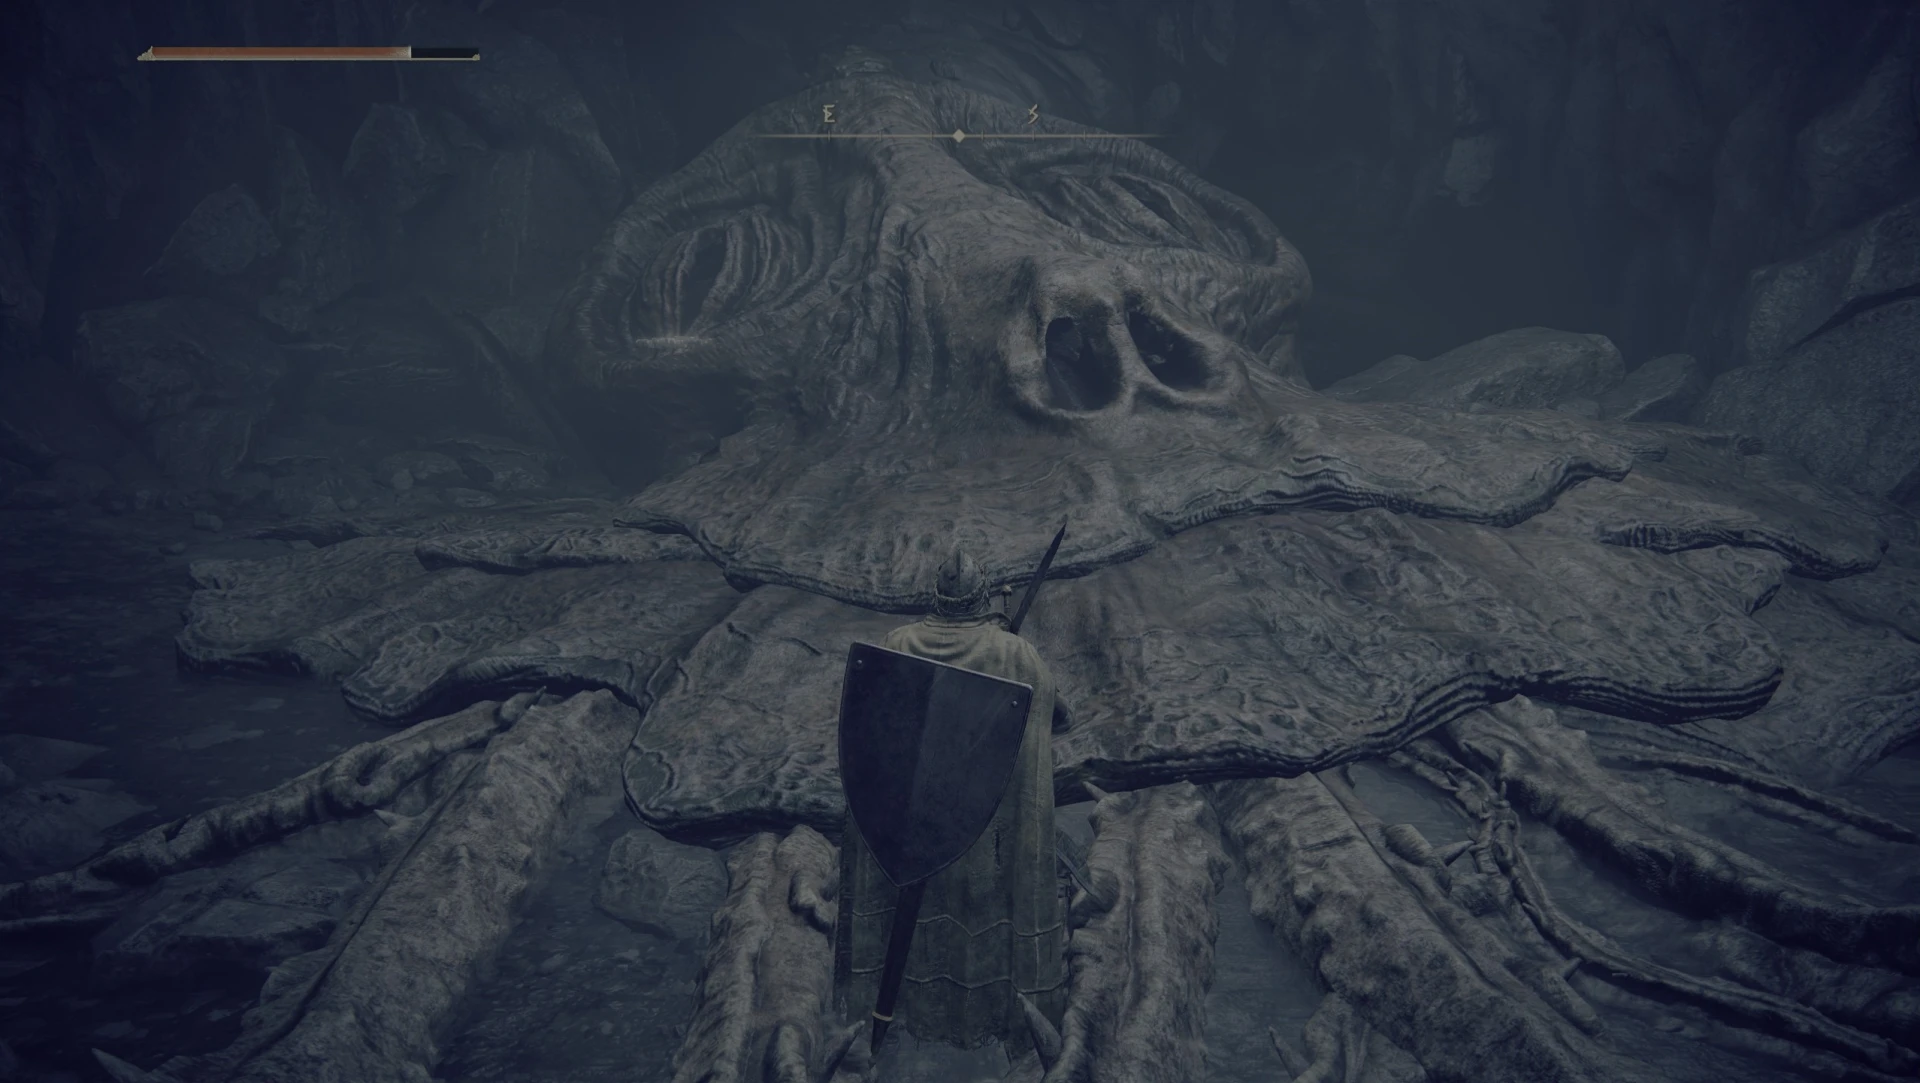 I stumbled across this, and I think it is supposed to be the corpse of a god.